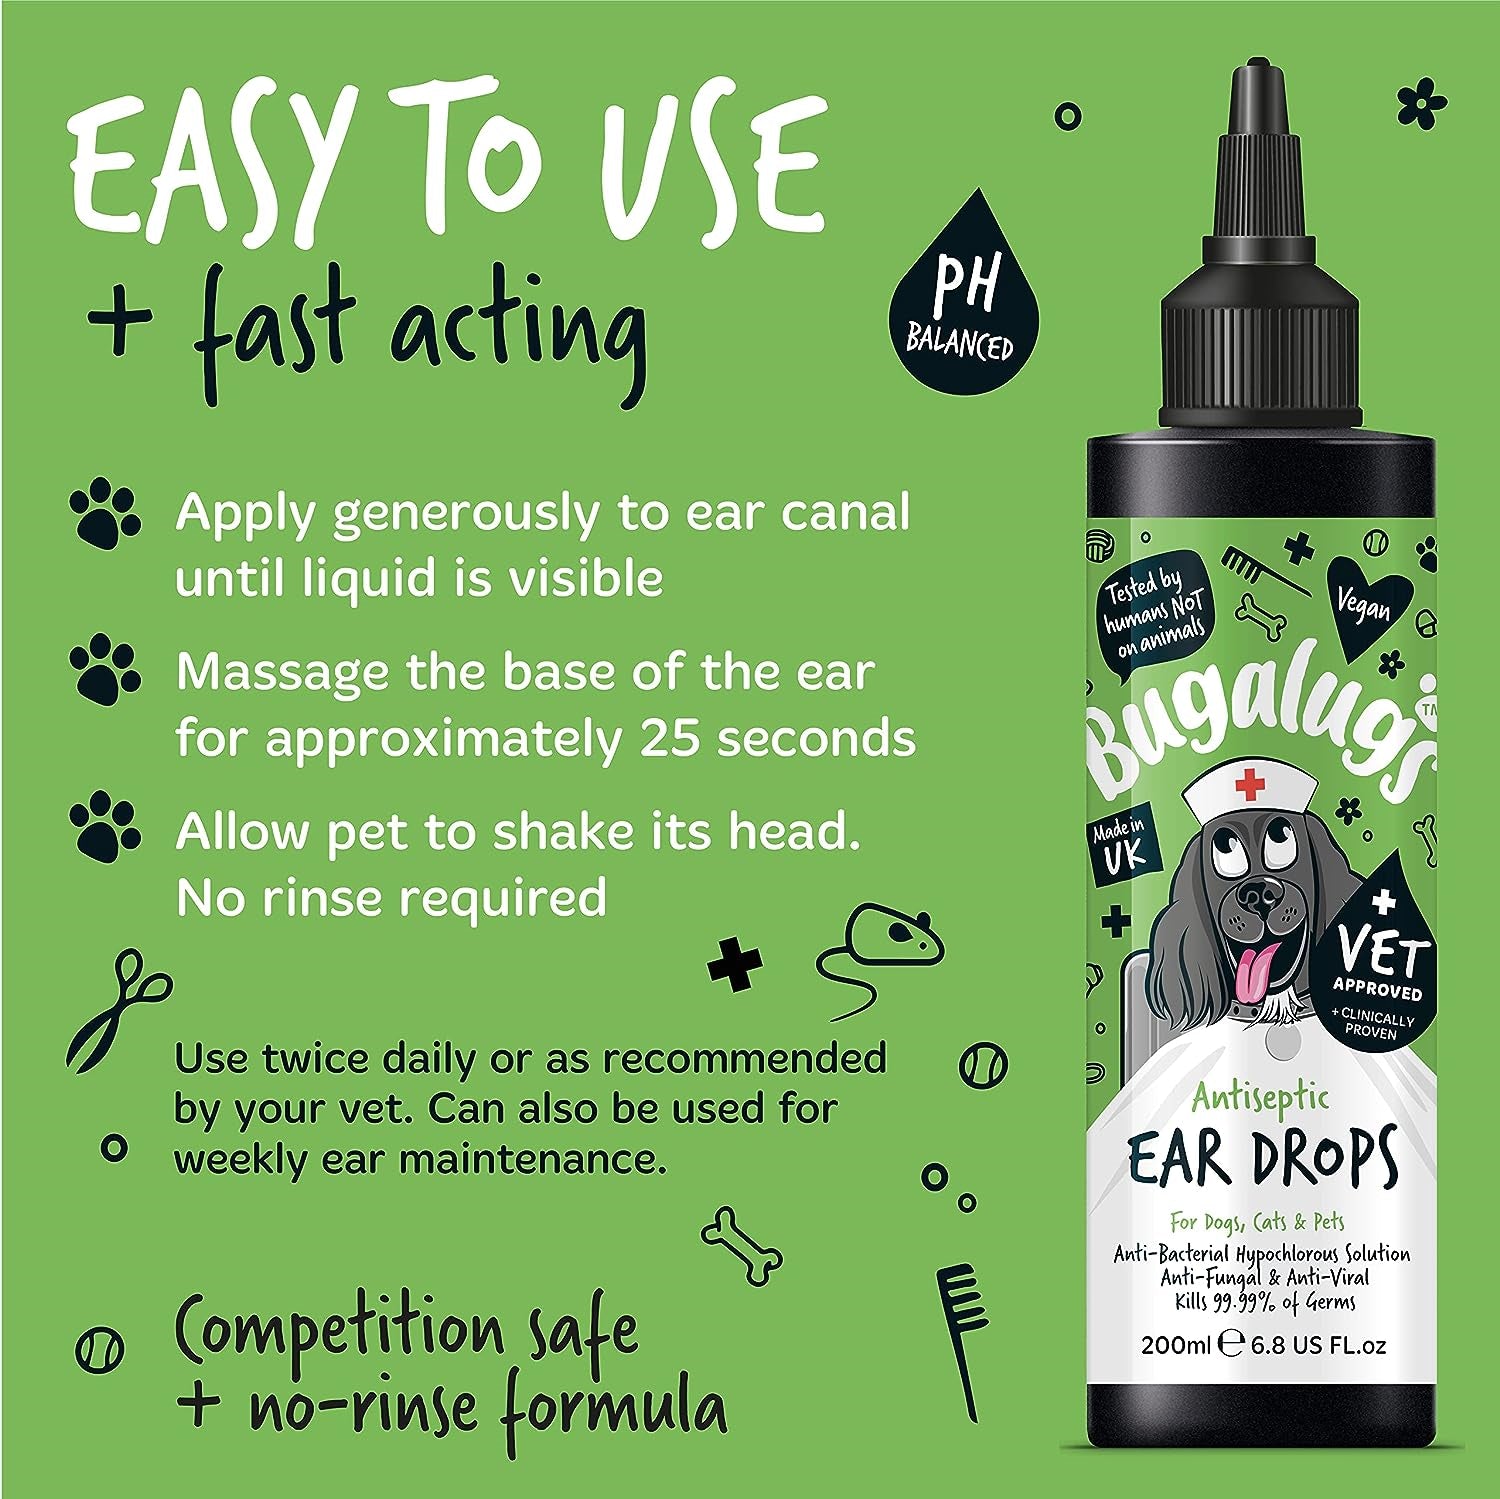 BUGALUGS Dog Ear Drops Treatment Provides Relief for Yeast Infection, Itching -